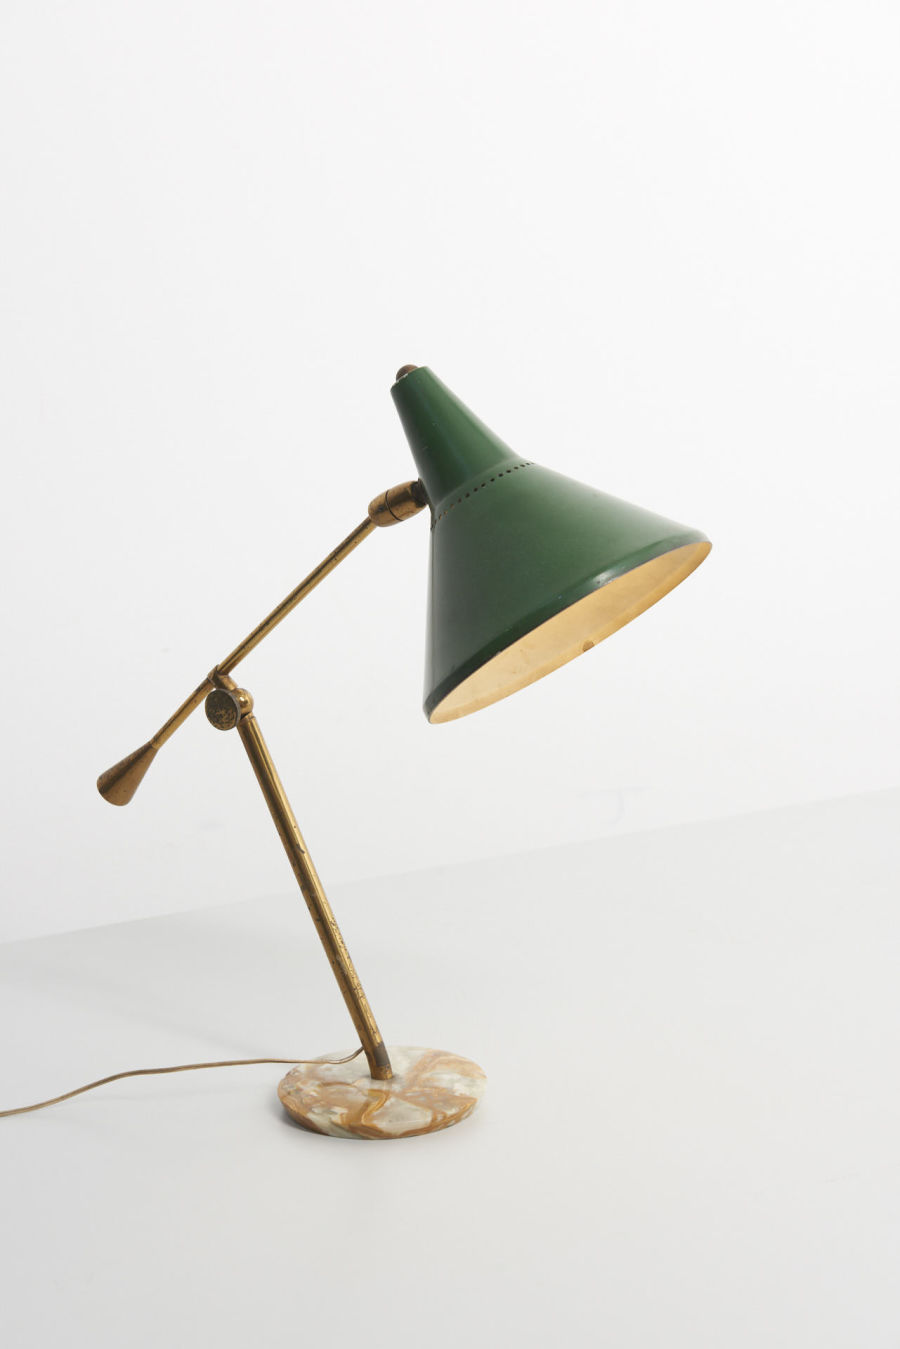 modestfurniture-vintage-2445-table-lamp-italy-marble-green-shade02